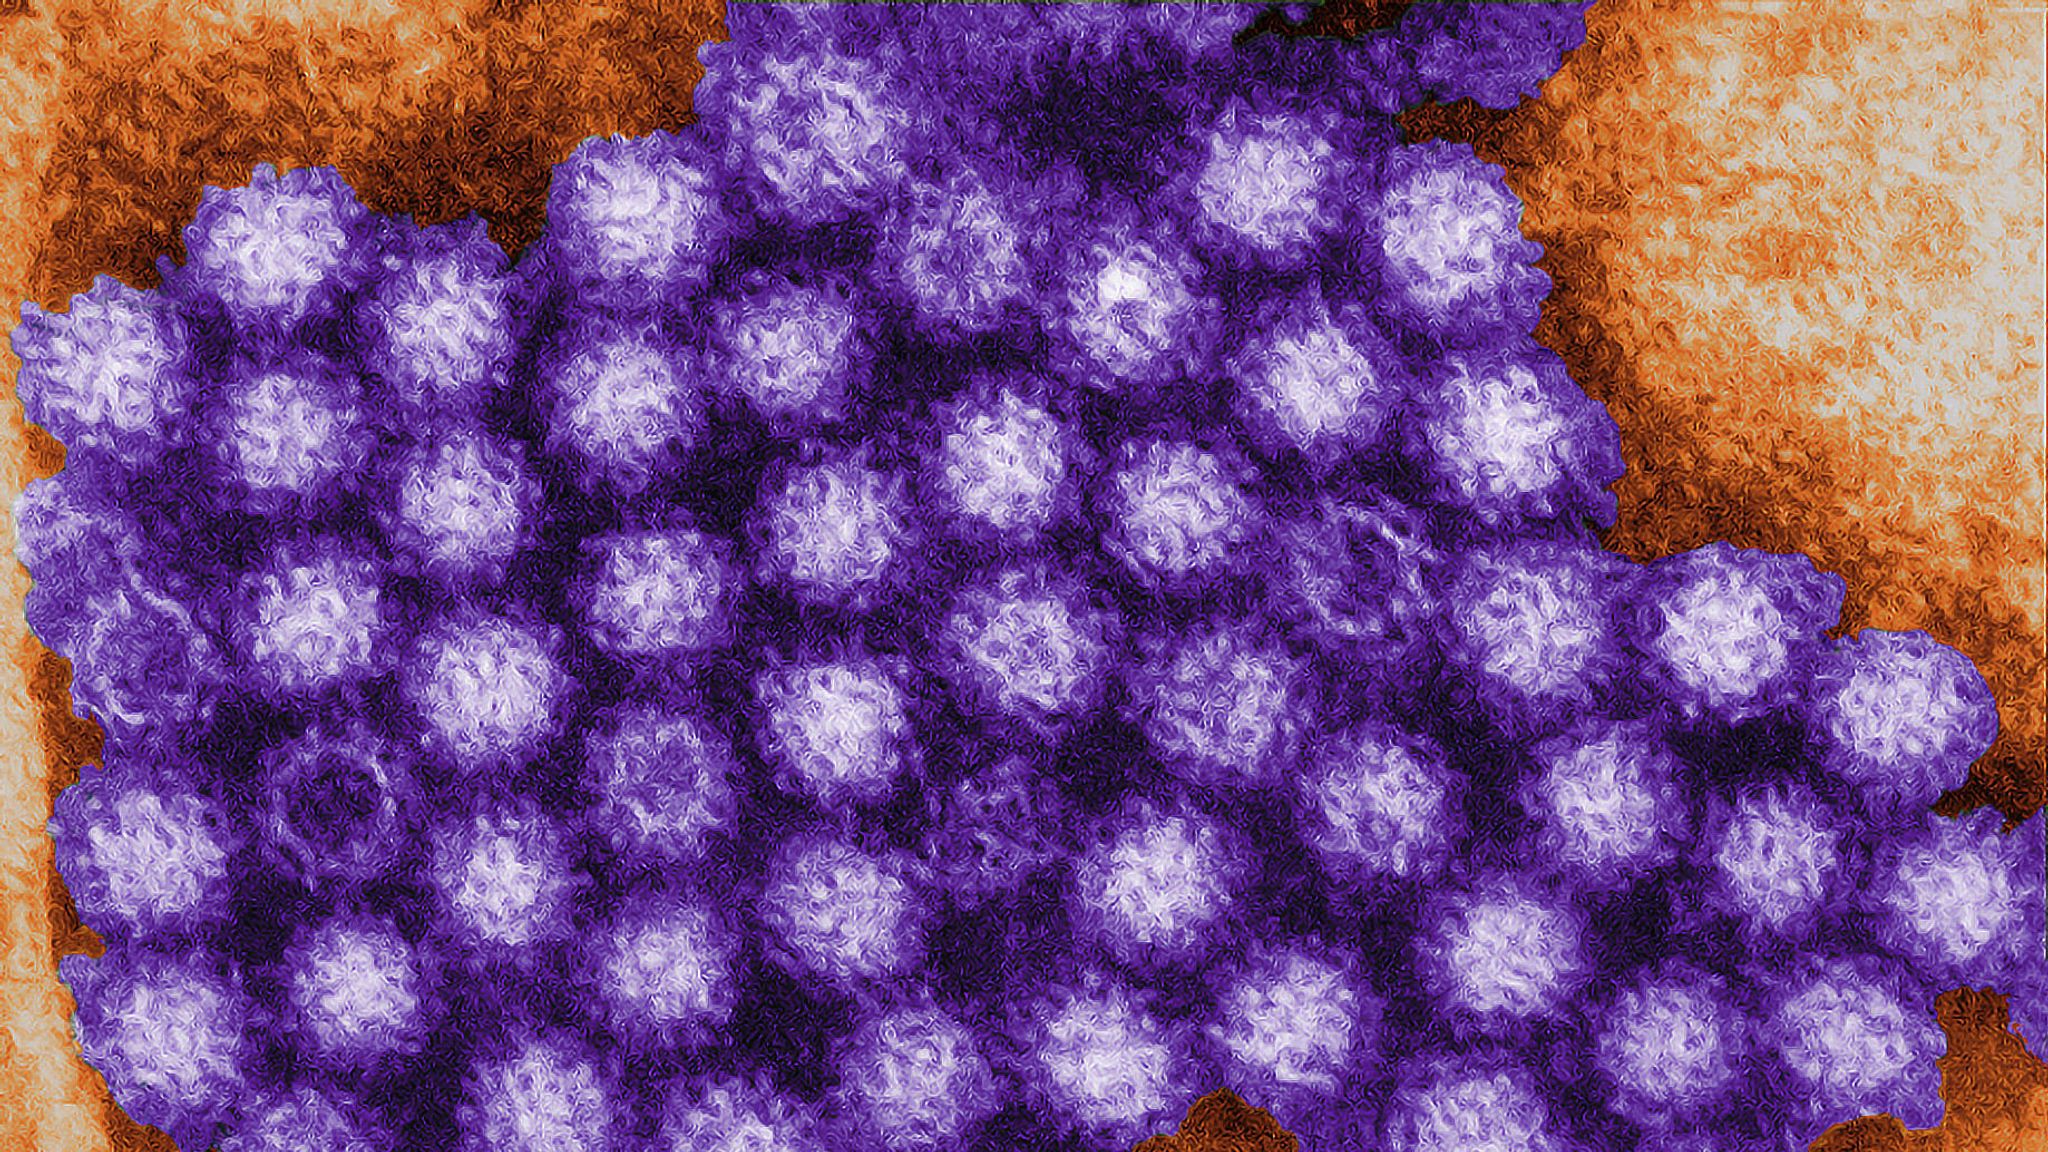 Norovirus levels 'highest in over a decade' for this time of year UK